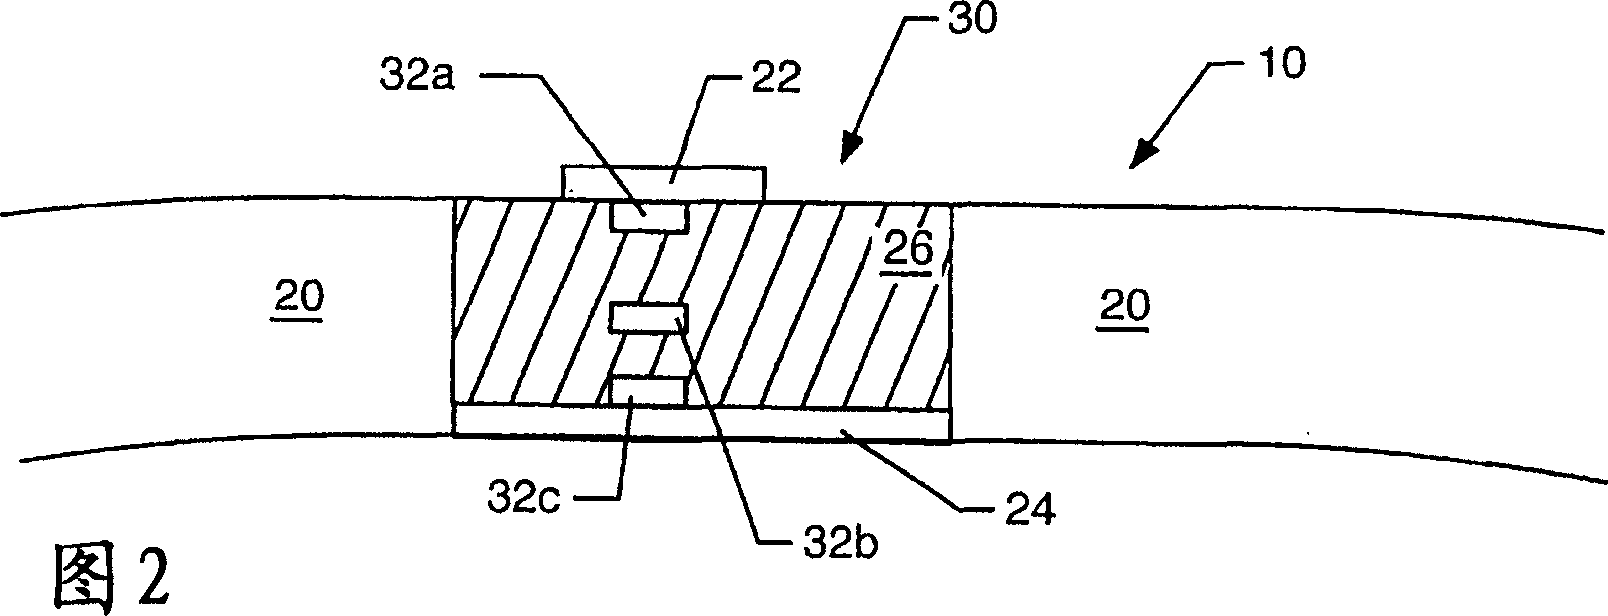 Microstrip antenna for an identification appliance